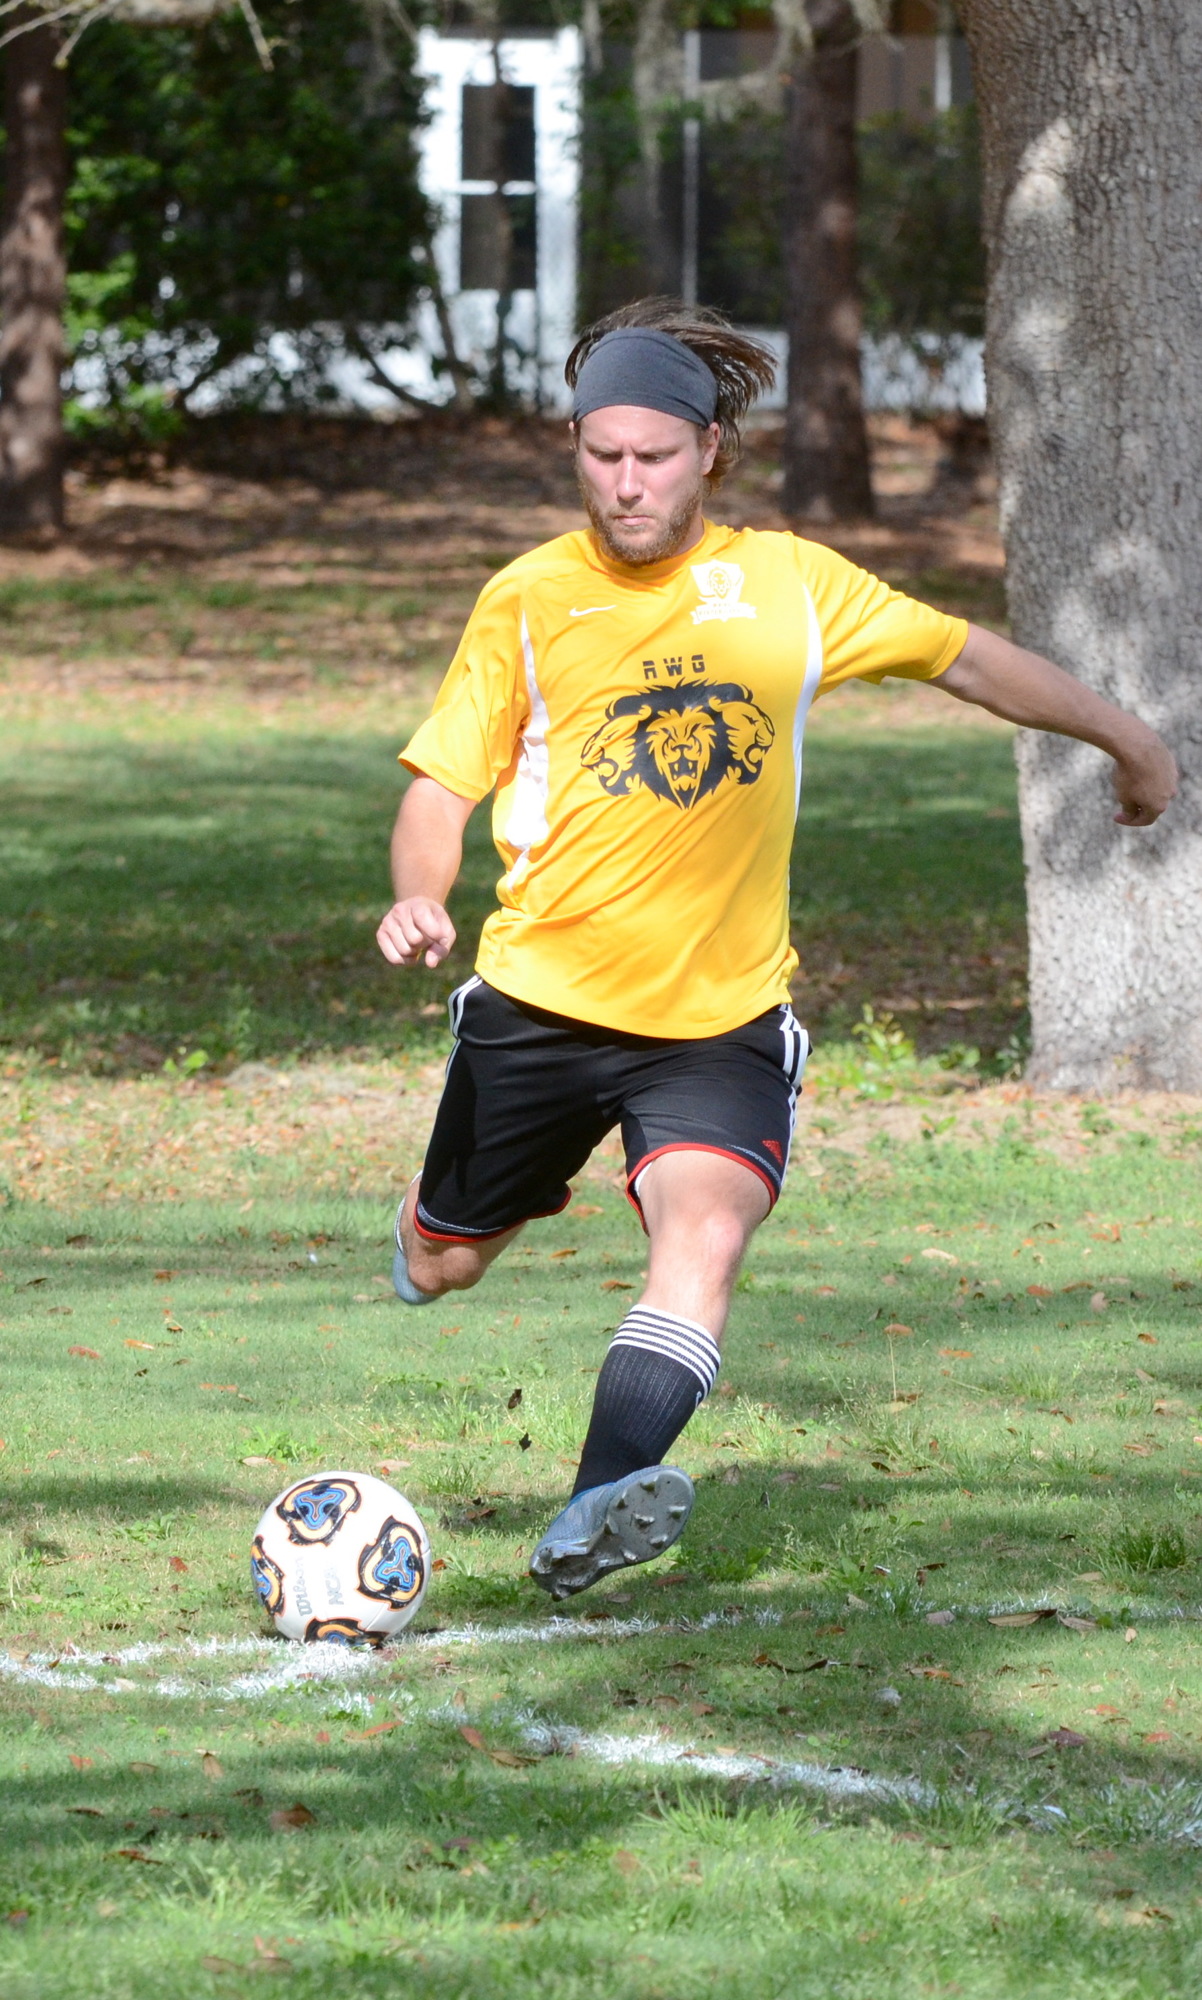 Bradlee Hollowell and the rest of Real Winter Garden SC played Spartans SC Feb. 25 at Barber Park in Orlando.